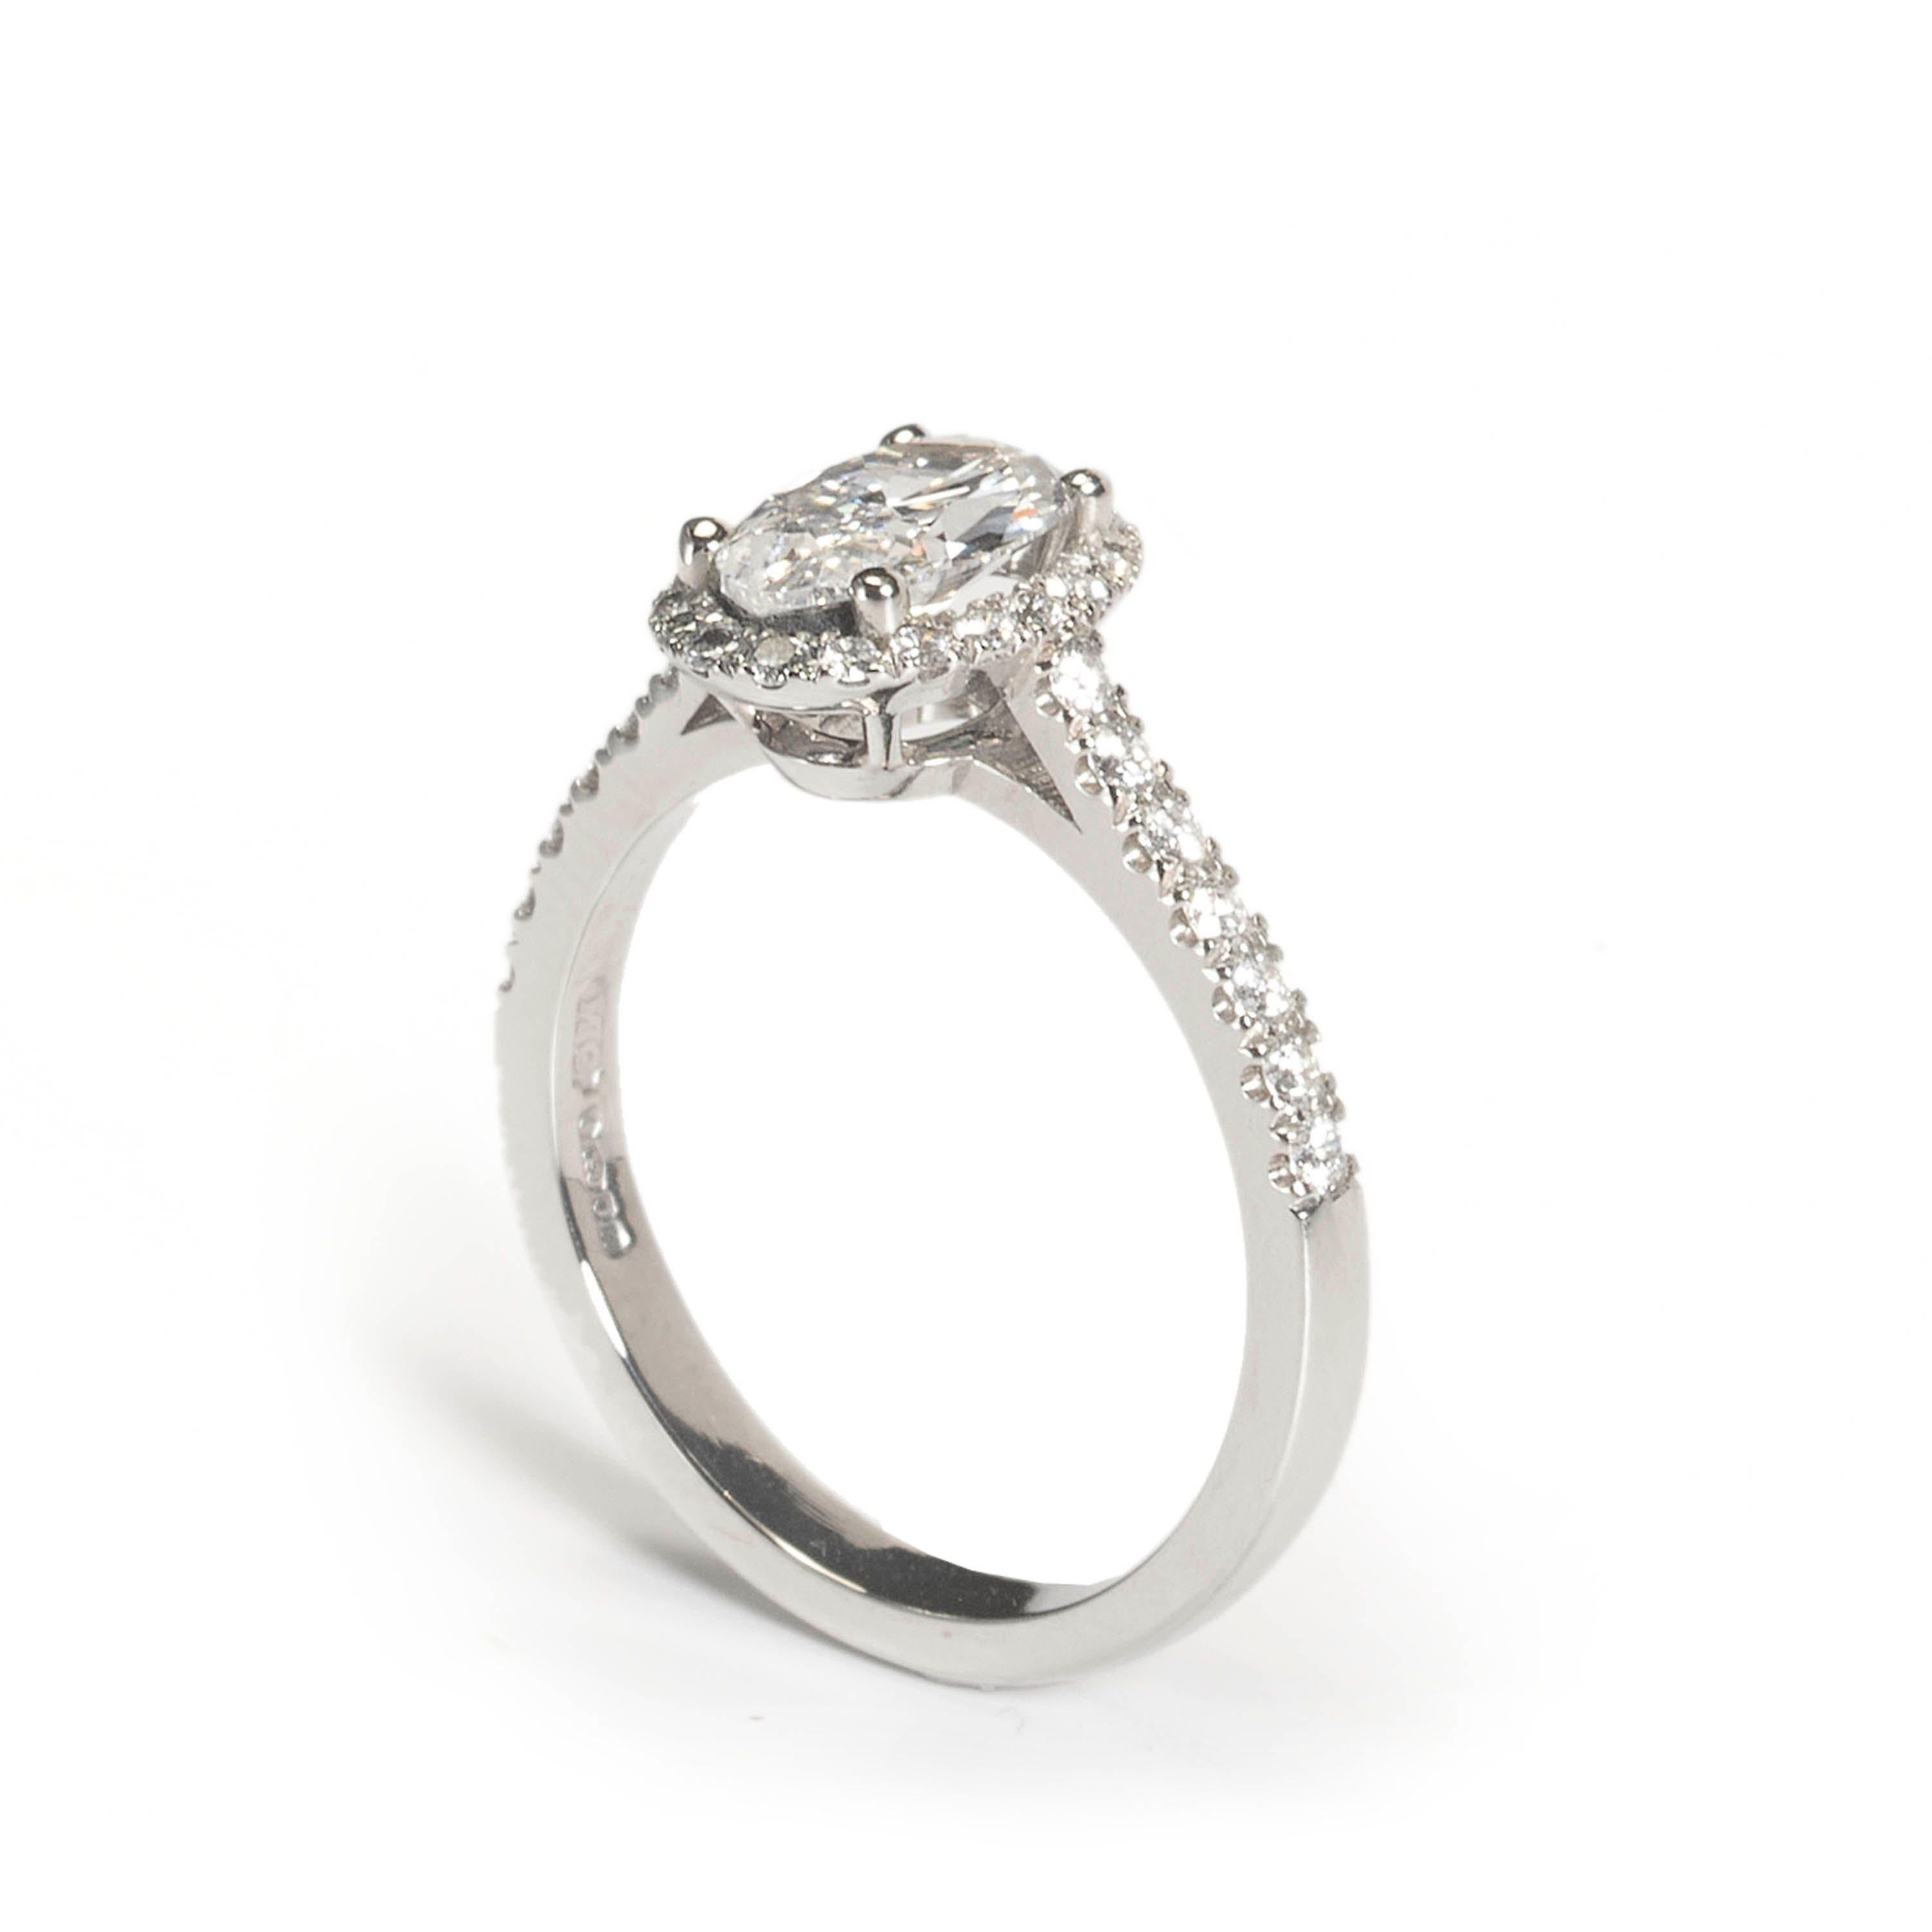 A micro pavé halo ring, set with a 1.00ct, D colour, VS2 clarity oval brilliant-cut diamond, in a four claw floating setting, surrounded by a cluster of micro pavé set brilliant-cut diamonds, with a row of seven diamonds, micro pavé set in each